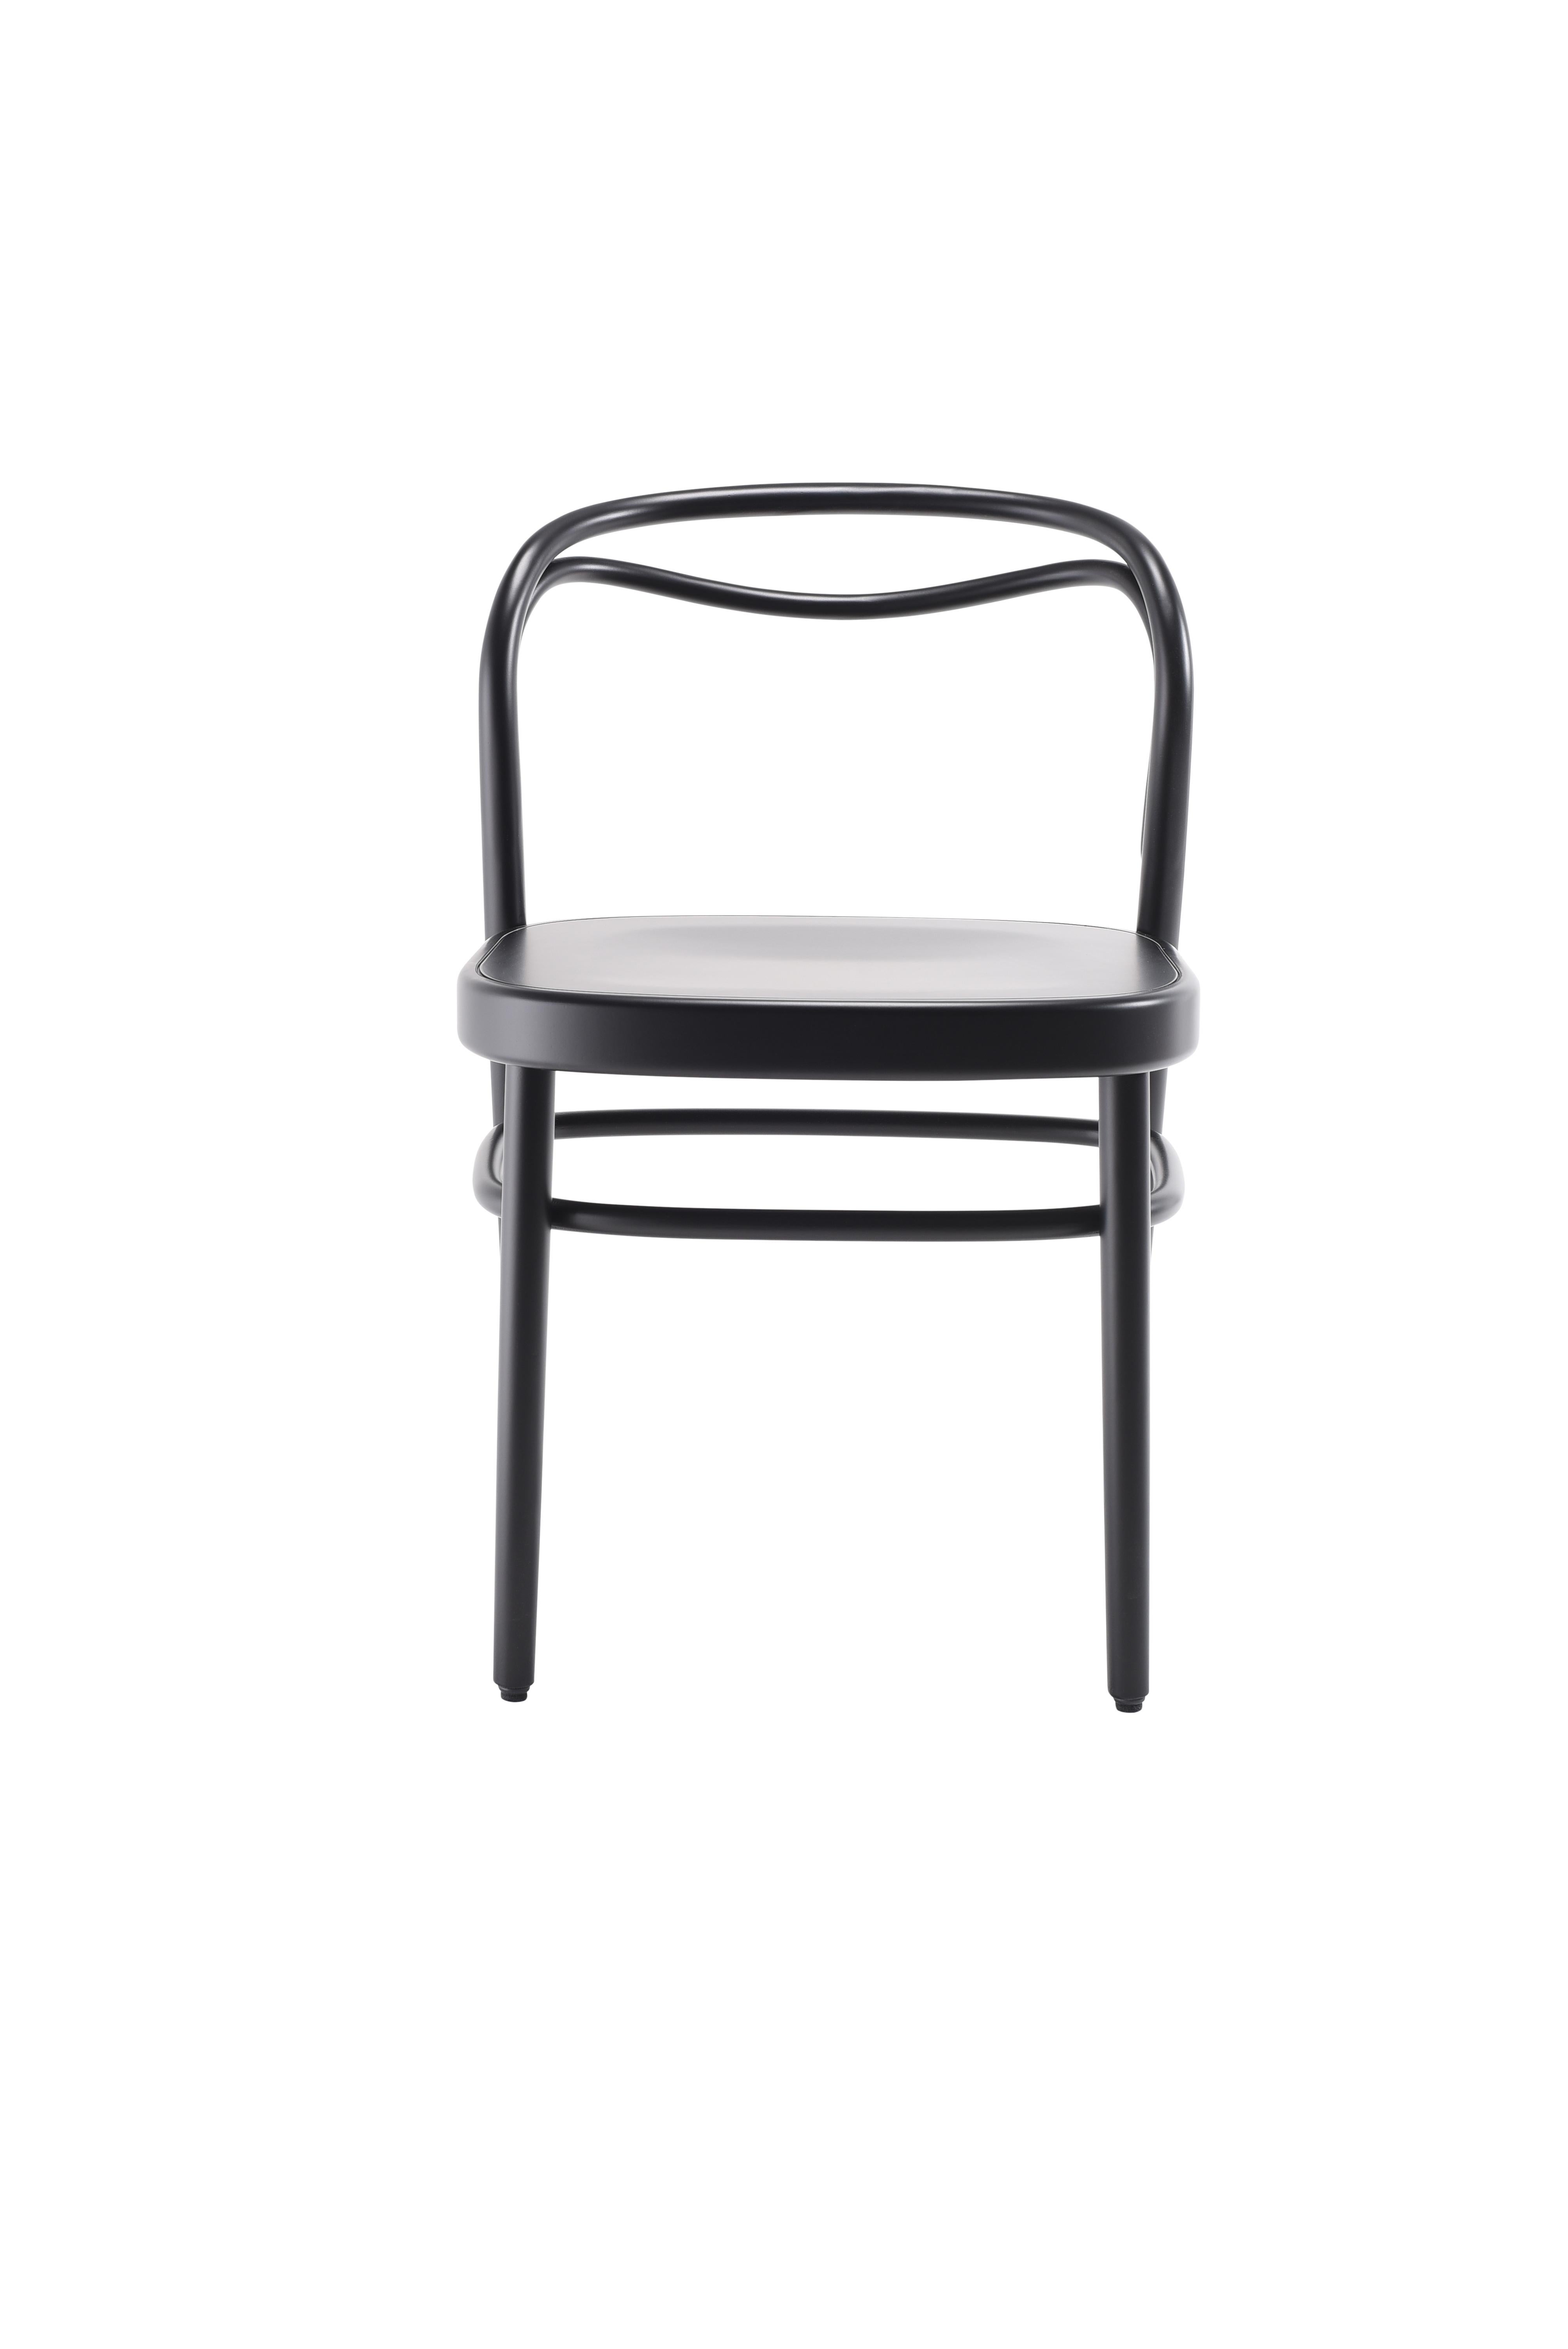 Gebrüder Thonet Vienna Beaulieu Chair with Plywood Seat by Philippe Nigro For Sale 6